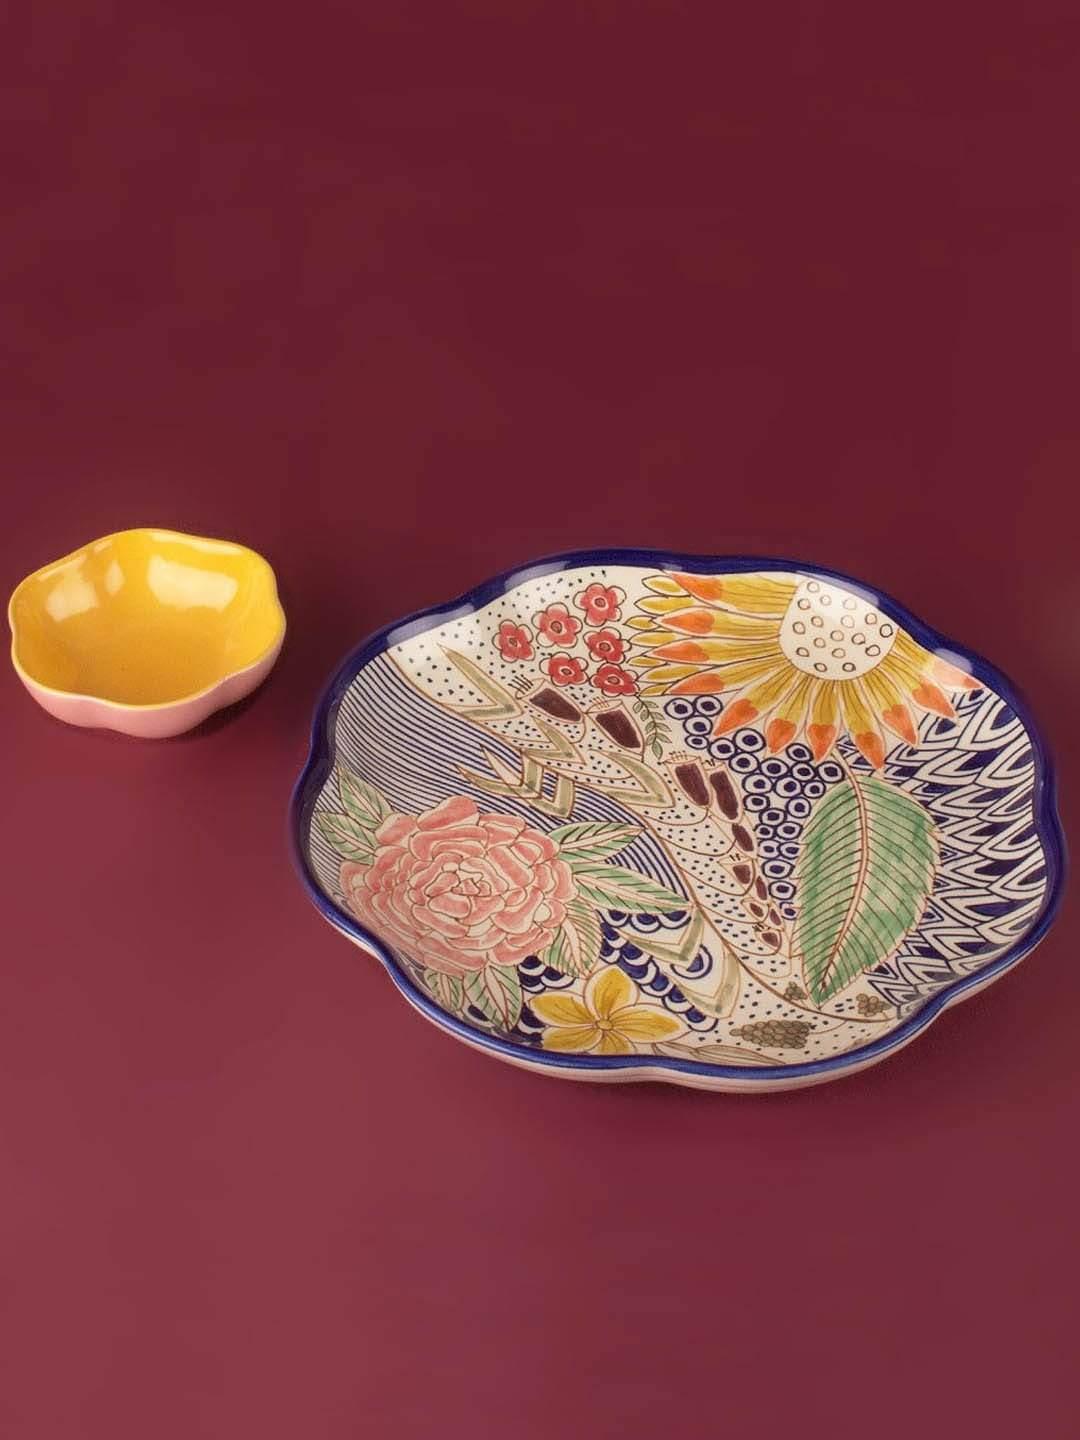 Secret Garden Chip & Dip Tray With BowlMaterial: 100% Stoneware
Dimensions: Tray-1.4 H Inch x 11.75 D Inch. Bowl- 1.5 H Inchx 4.5 D Inch

Dishwasher safe, Microwave safe,Do not scrub with steel wool. WillSecret Garden Chip & Dip TrayThe Wishing Chair